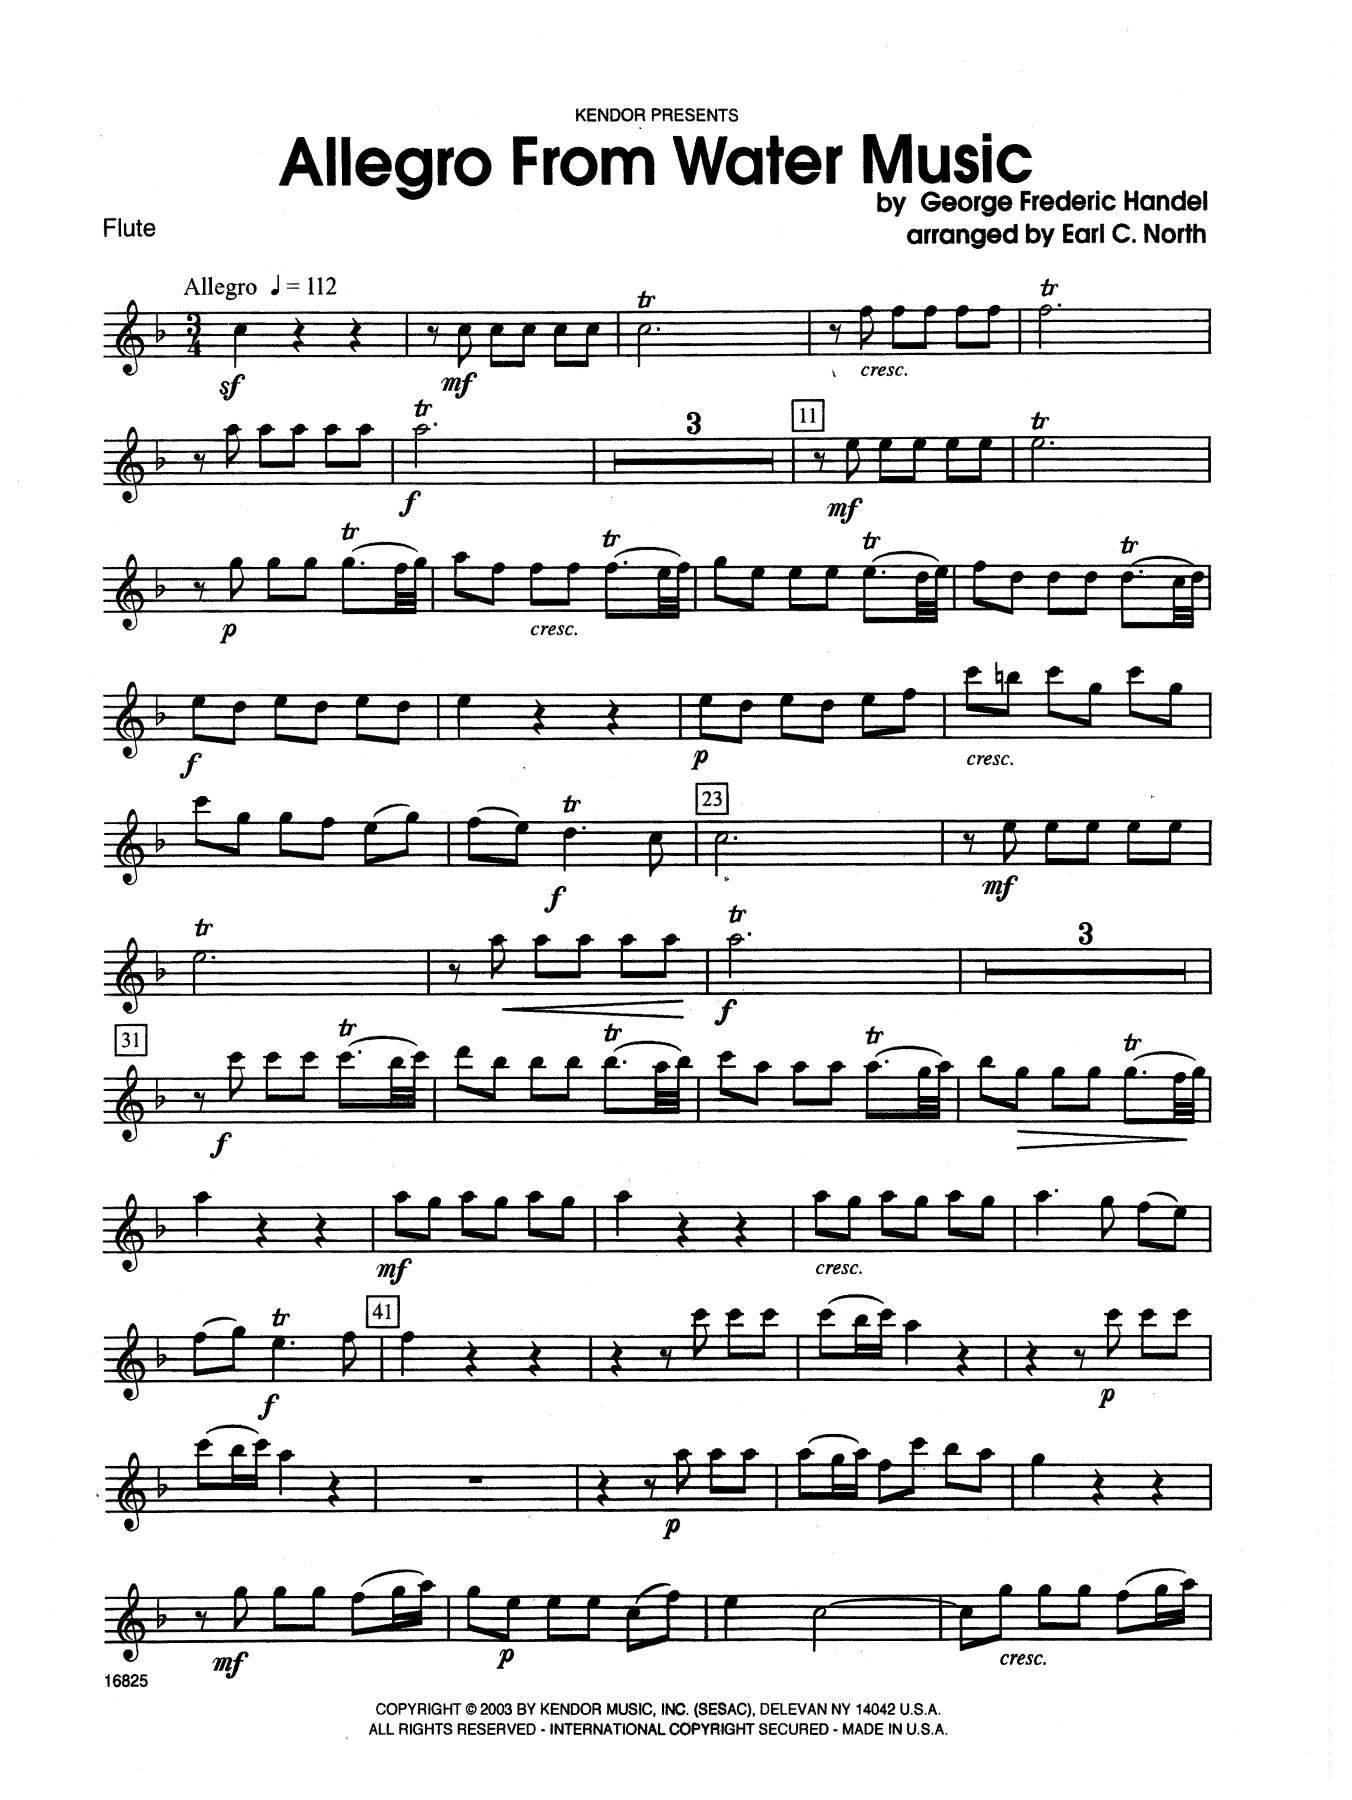 Download Earl North Allegro From Water Music - Flute Sheet Music